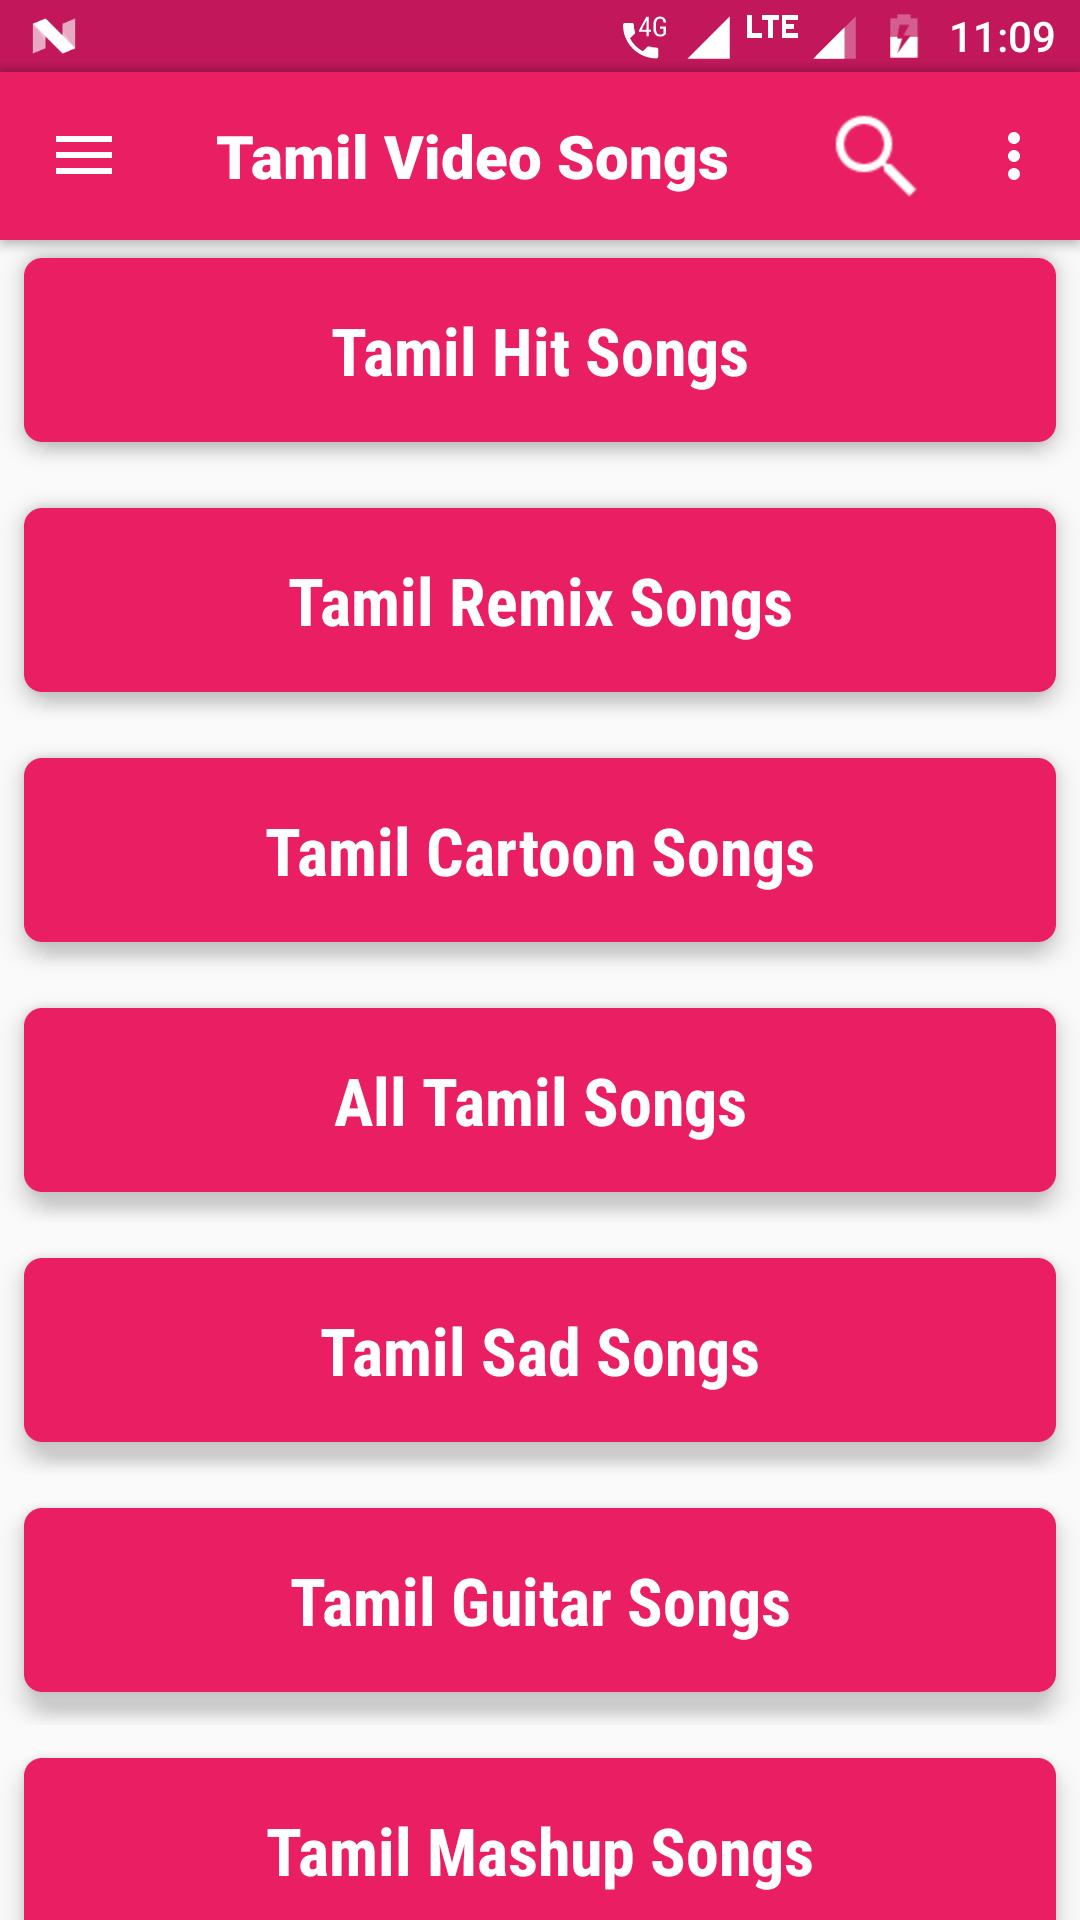 Tamil Songs & Music - Tamil Movies Video Song 2017 APK for Android Download